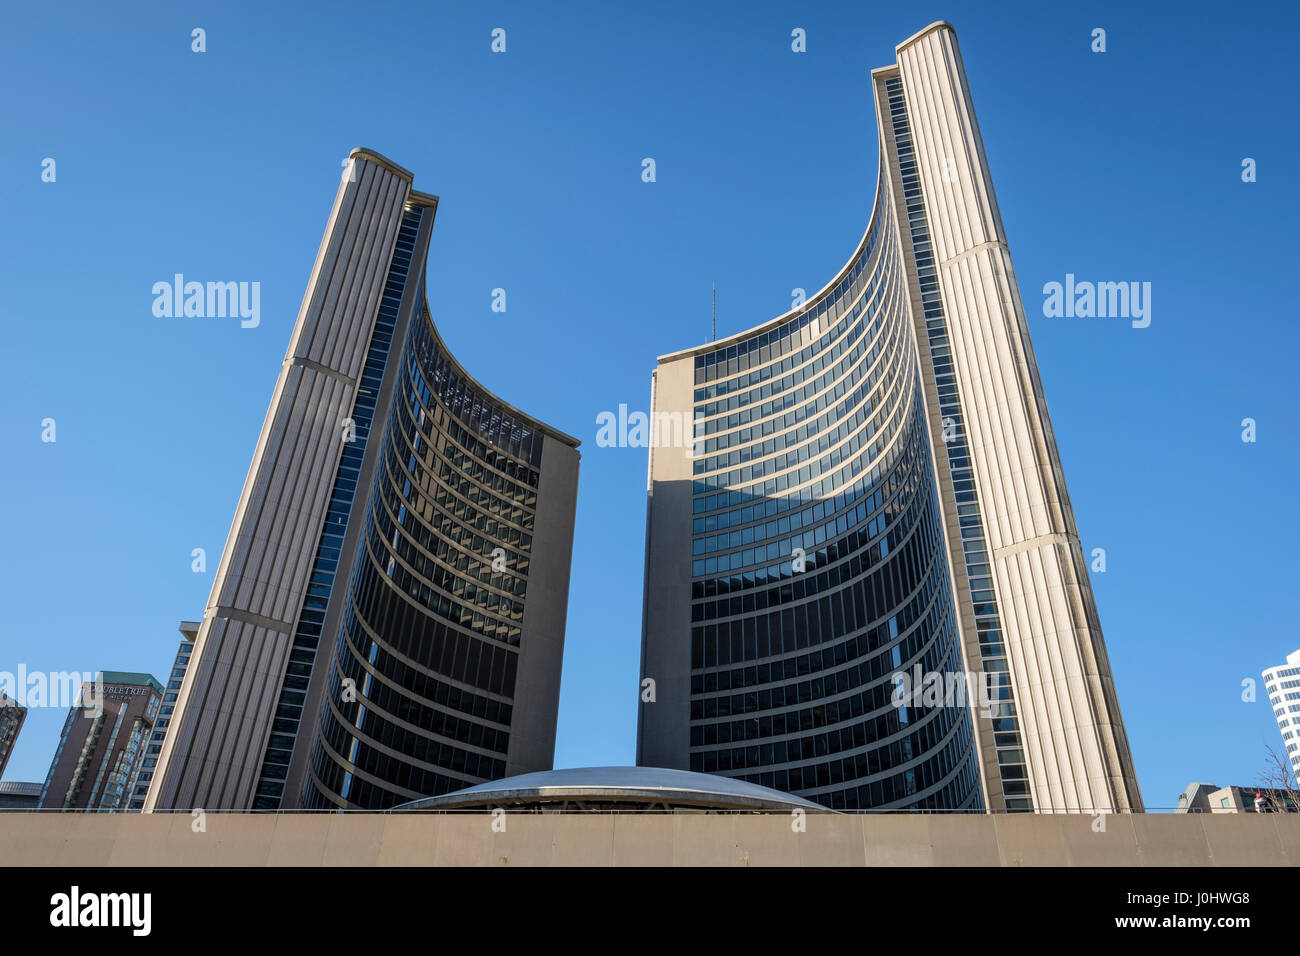 Toronto City Hall, Nathan Phillips Square in winter, facade of the two towers, view from below, downtown Toronto, Ontario, Canada. Stock Photo